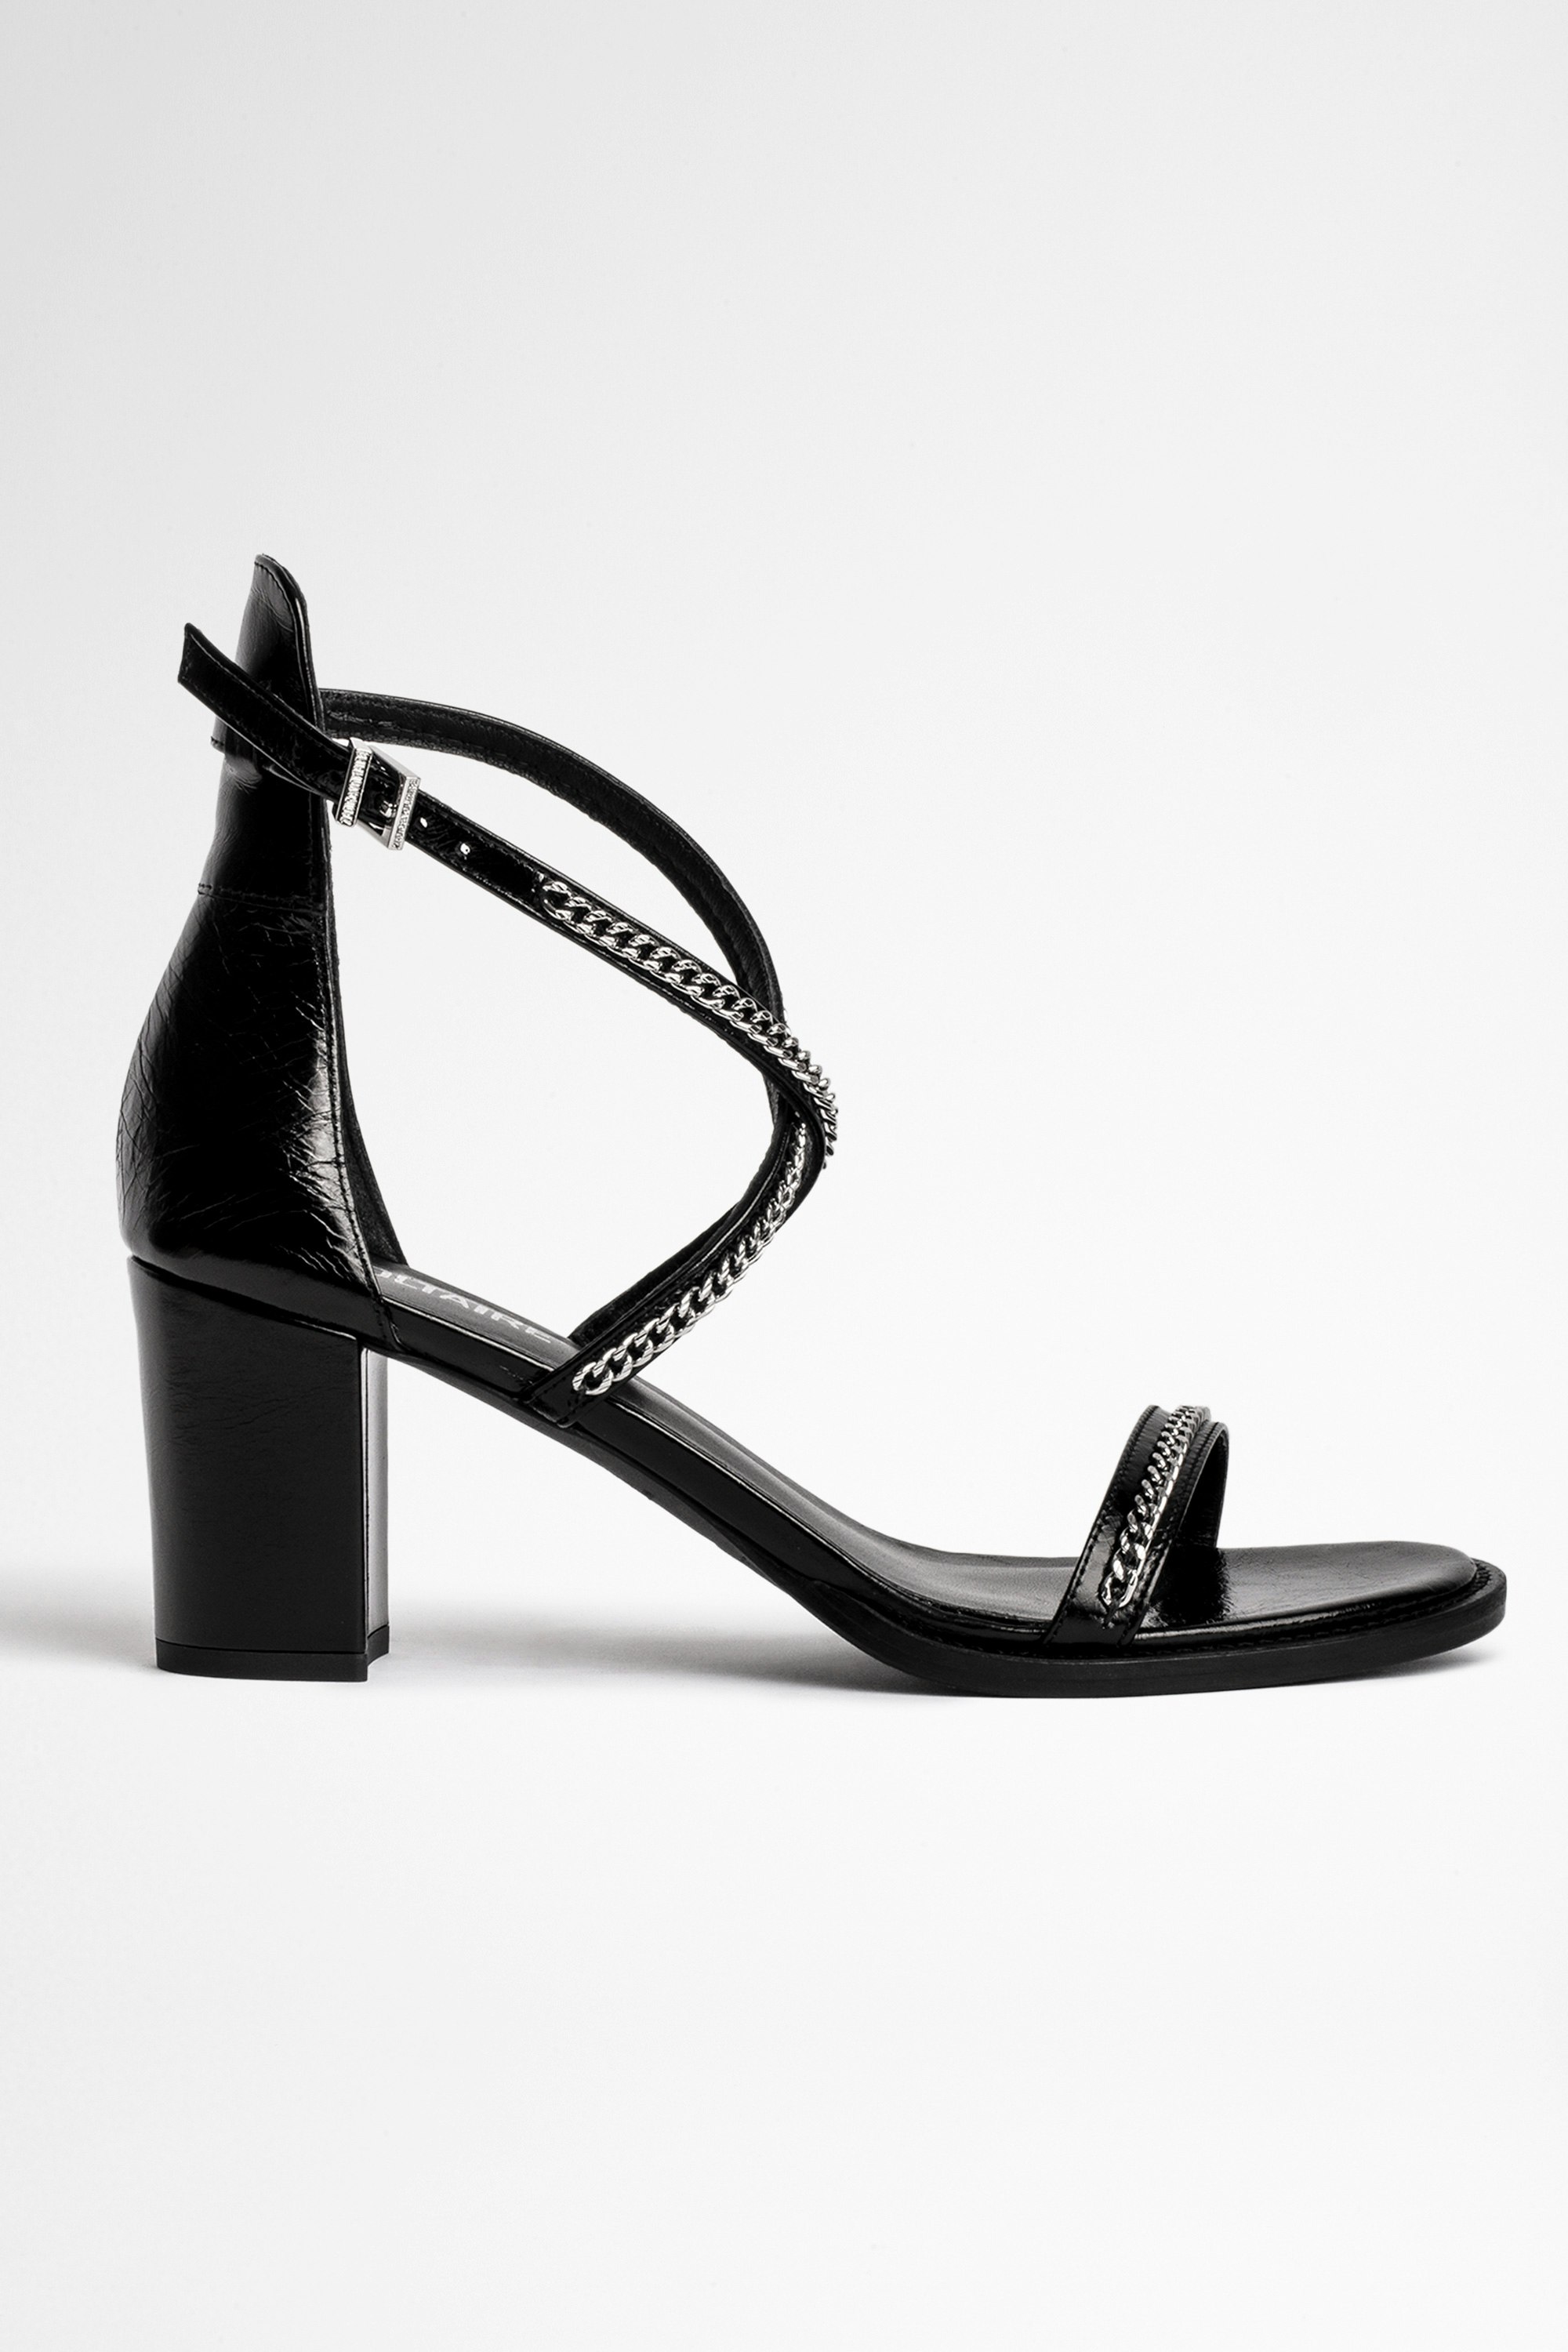 May sandals Leather Women's black leather sandals with heels and chain straps